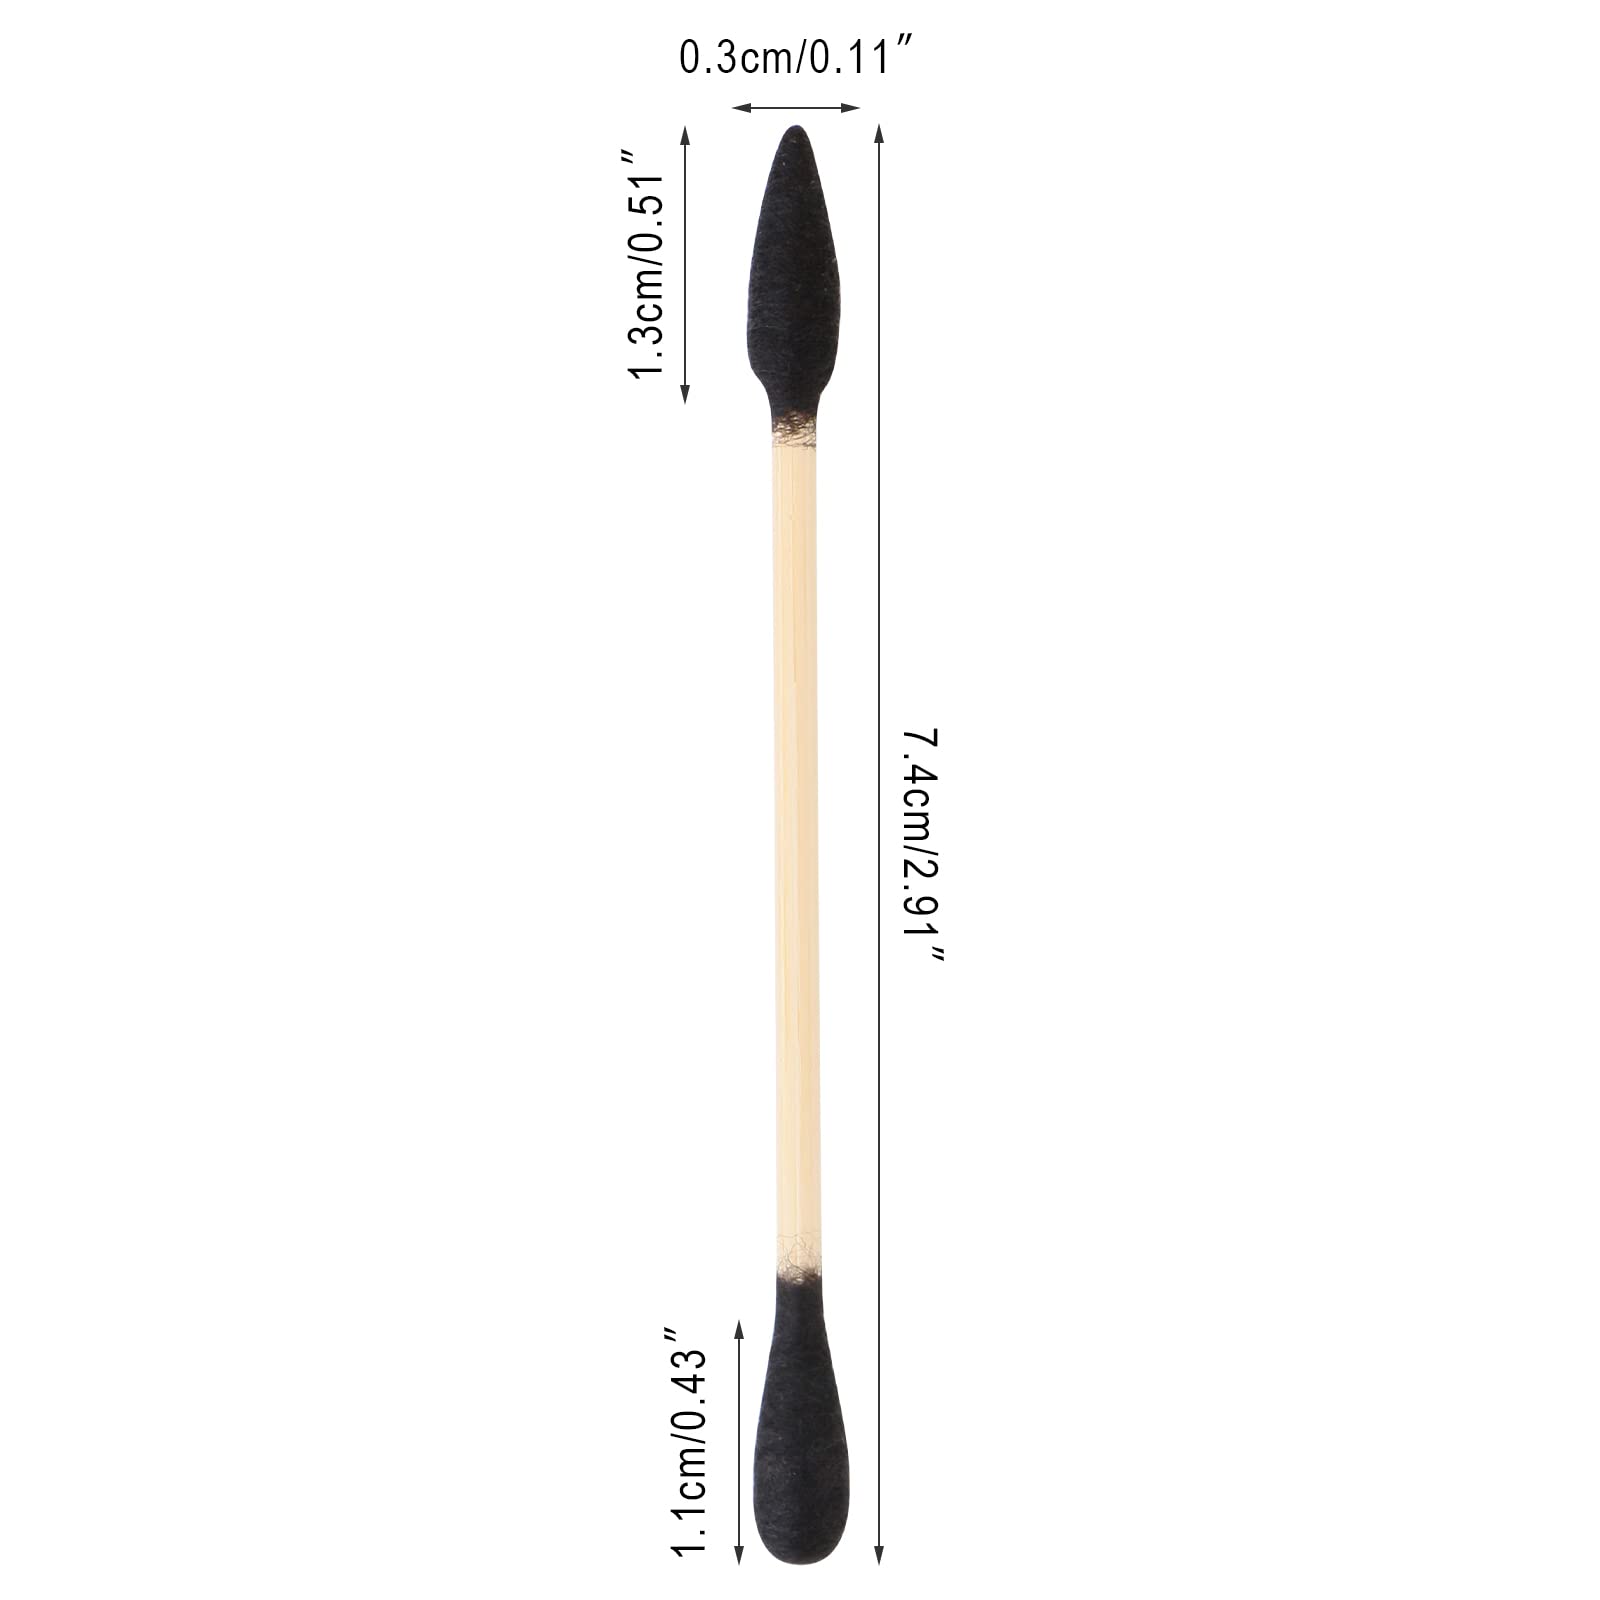 Natural Bamboo Cotton Swabs, Eco-Friendly & Biodegradable – Comfortable and Soft,Plastic Free Double Ear Sticks for Ears Cleaning and Makeup,Dirt Removal,crafts,painting (Black-1 Pack of 100)